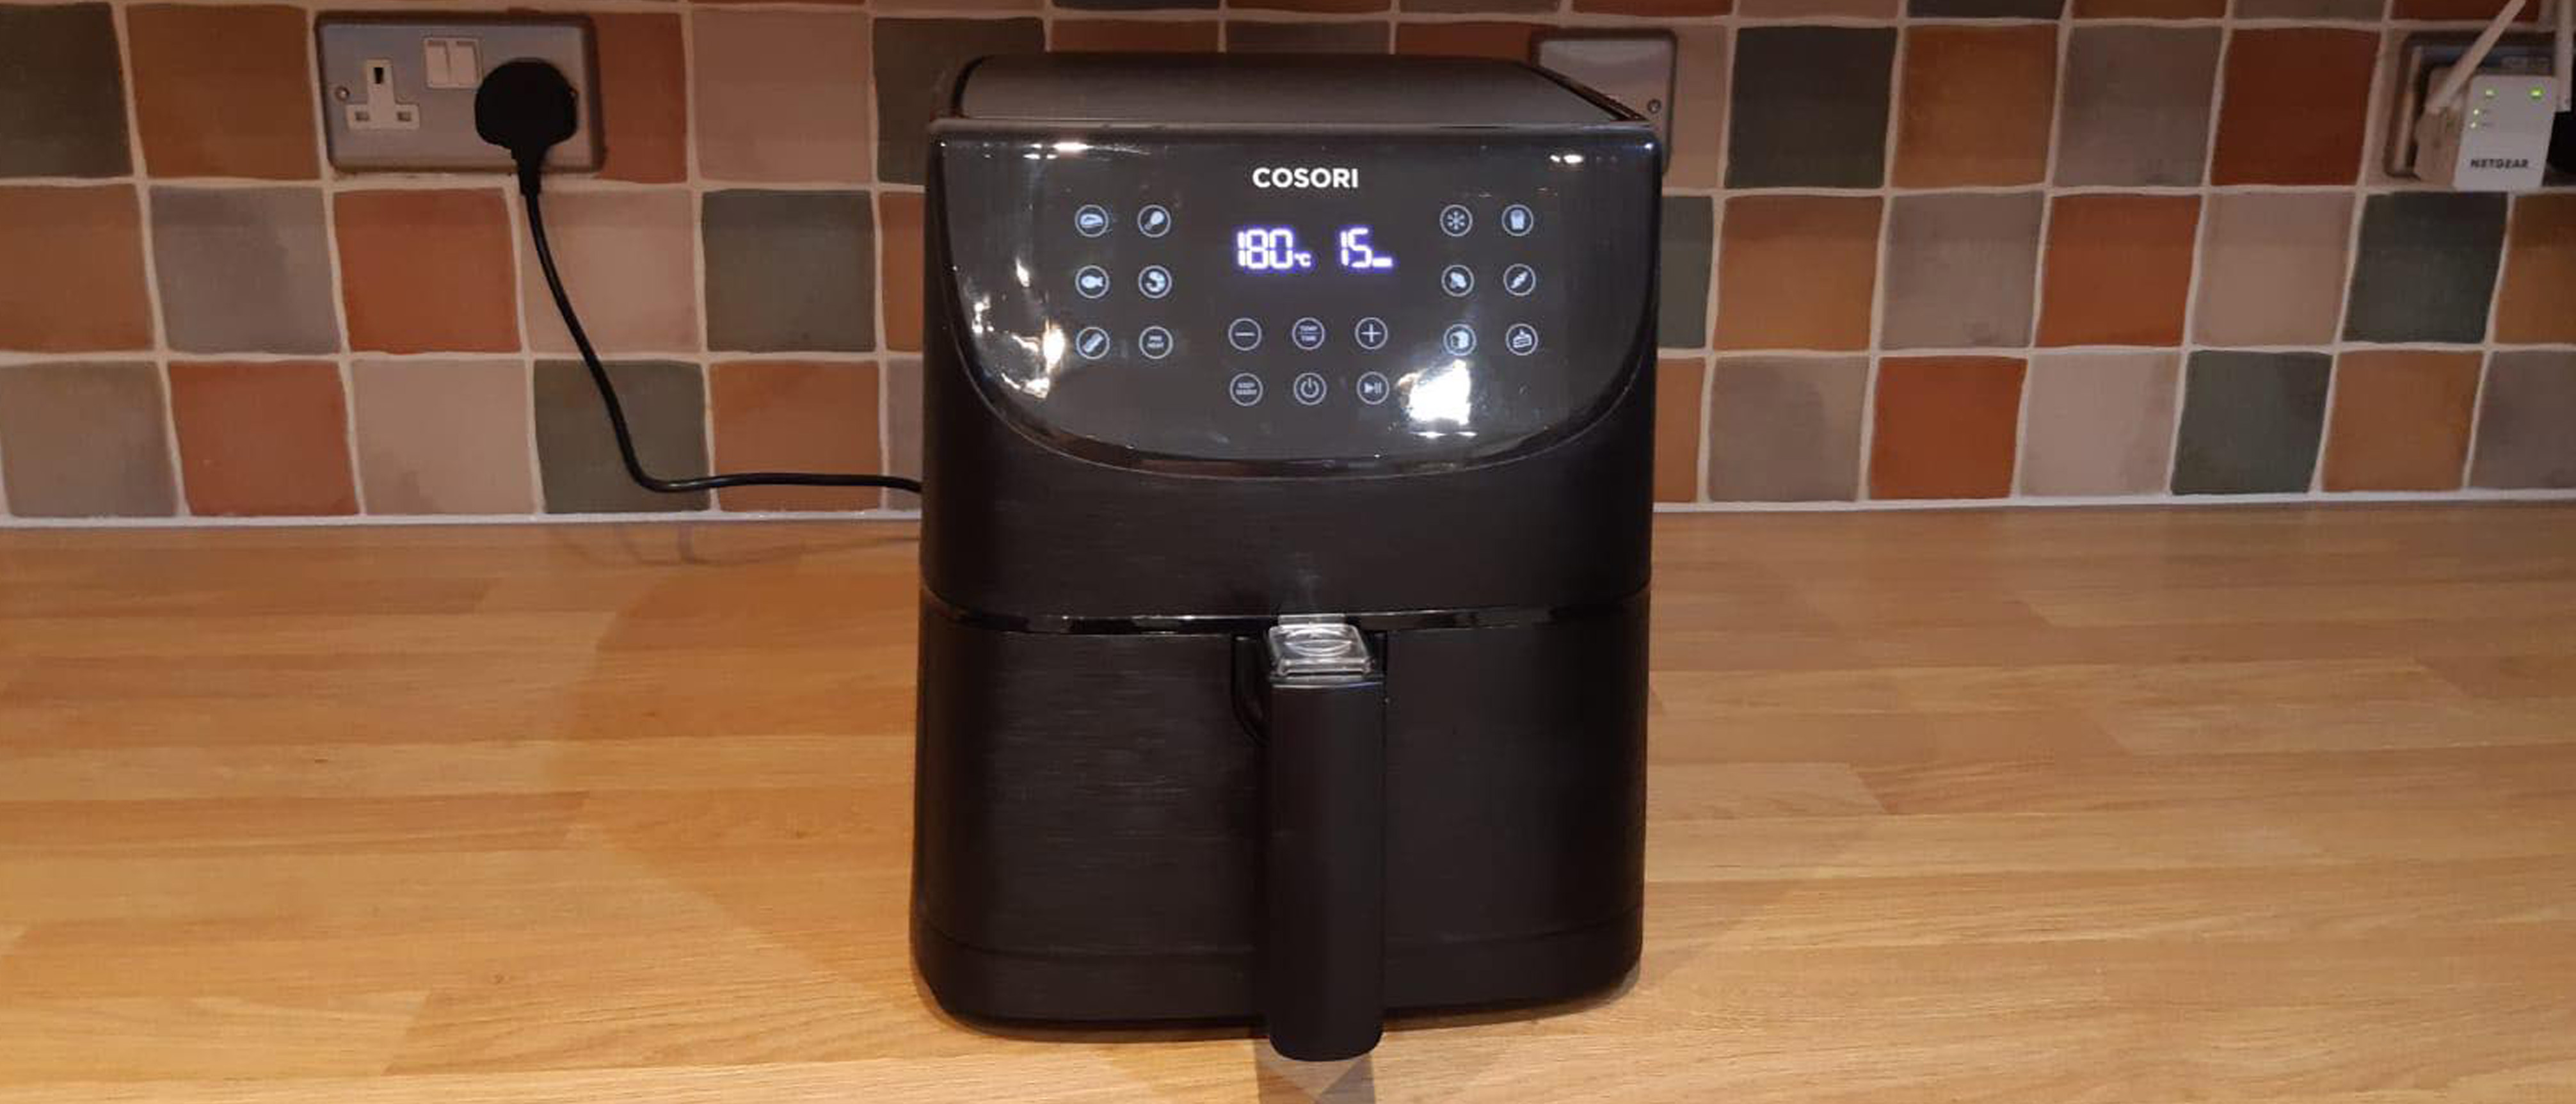 The Cosori 3.7 QT Air Fryer Review